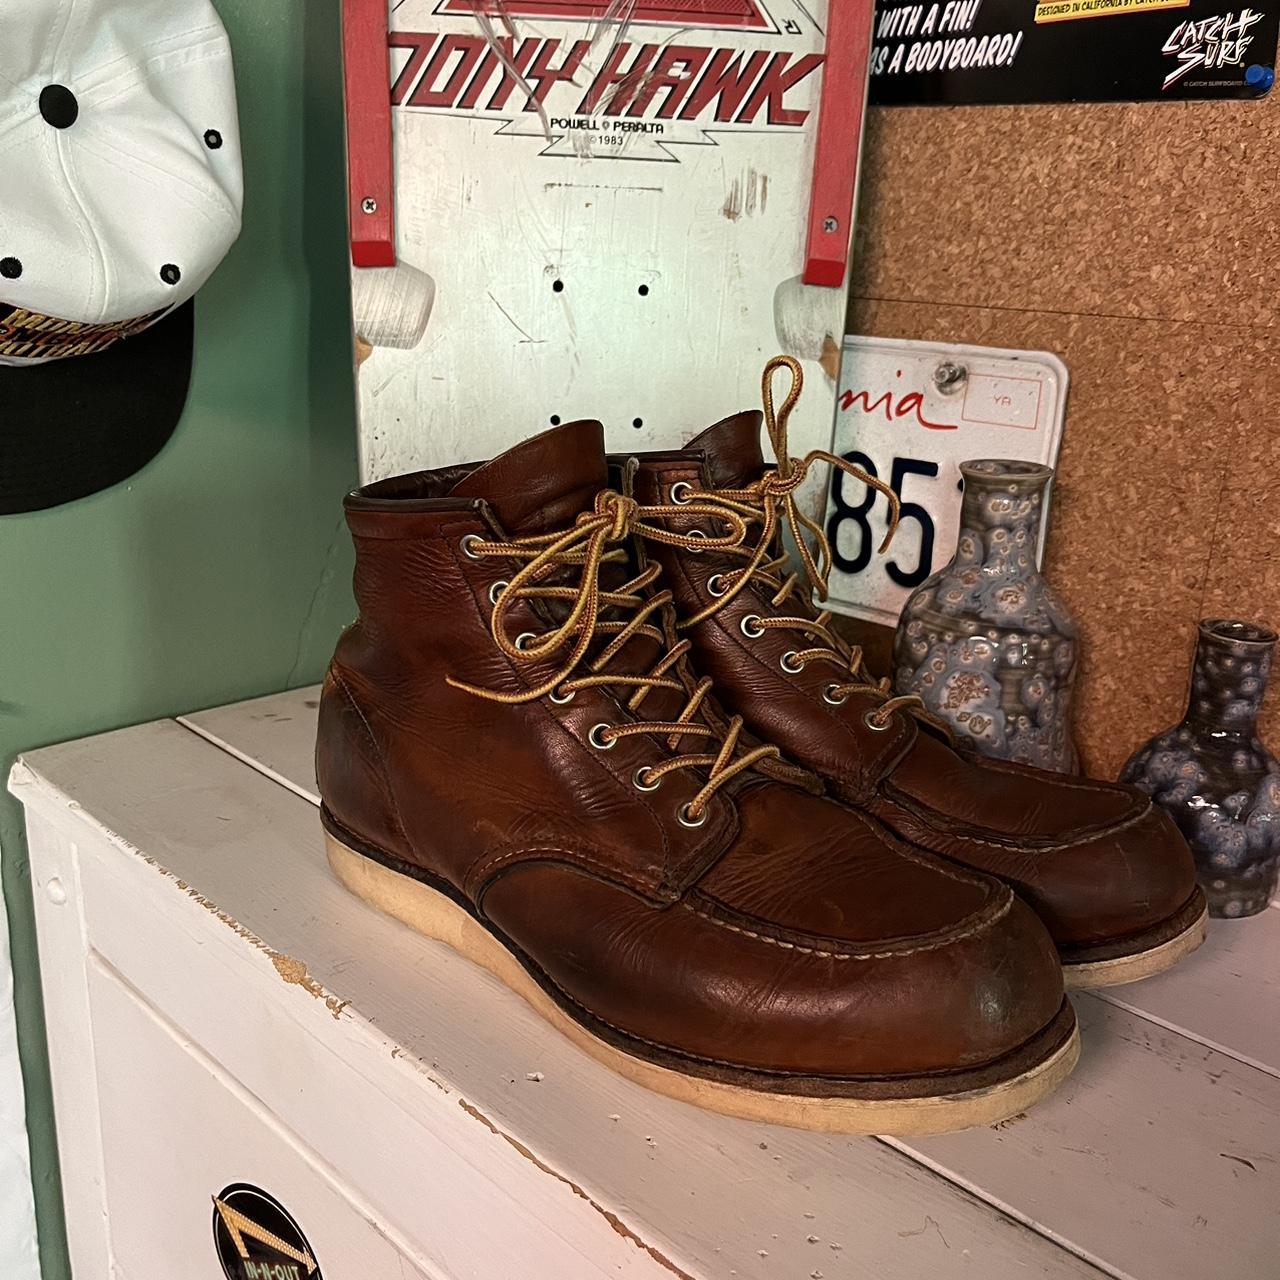 Redwing 875 size 10.5 Made in USA - Depop